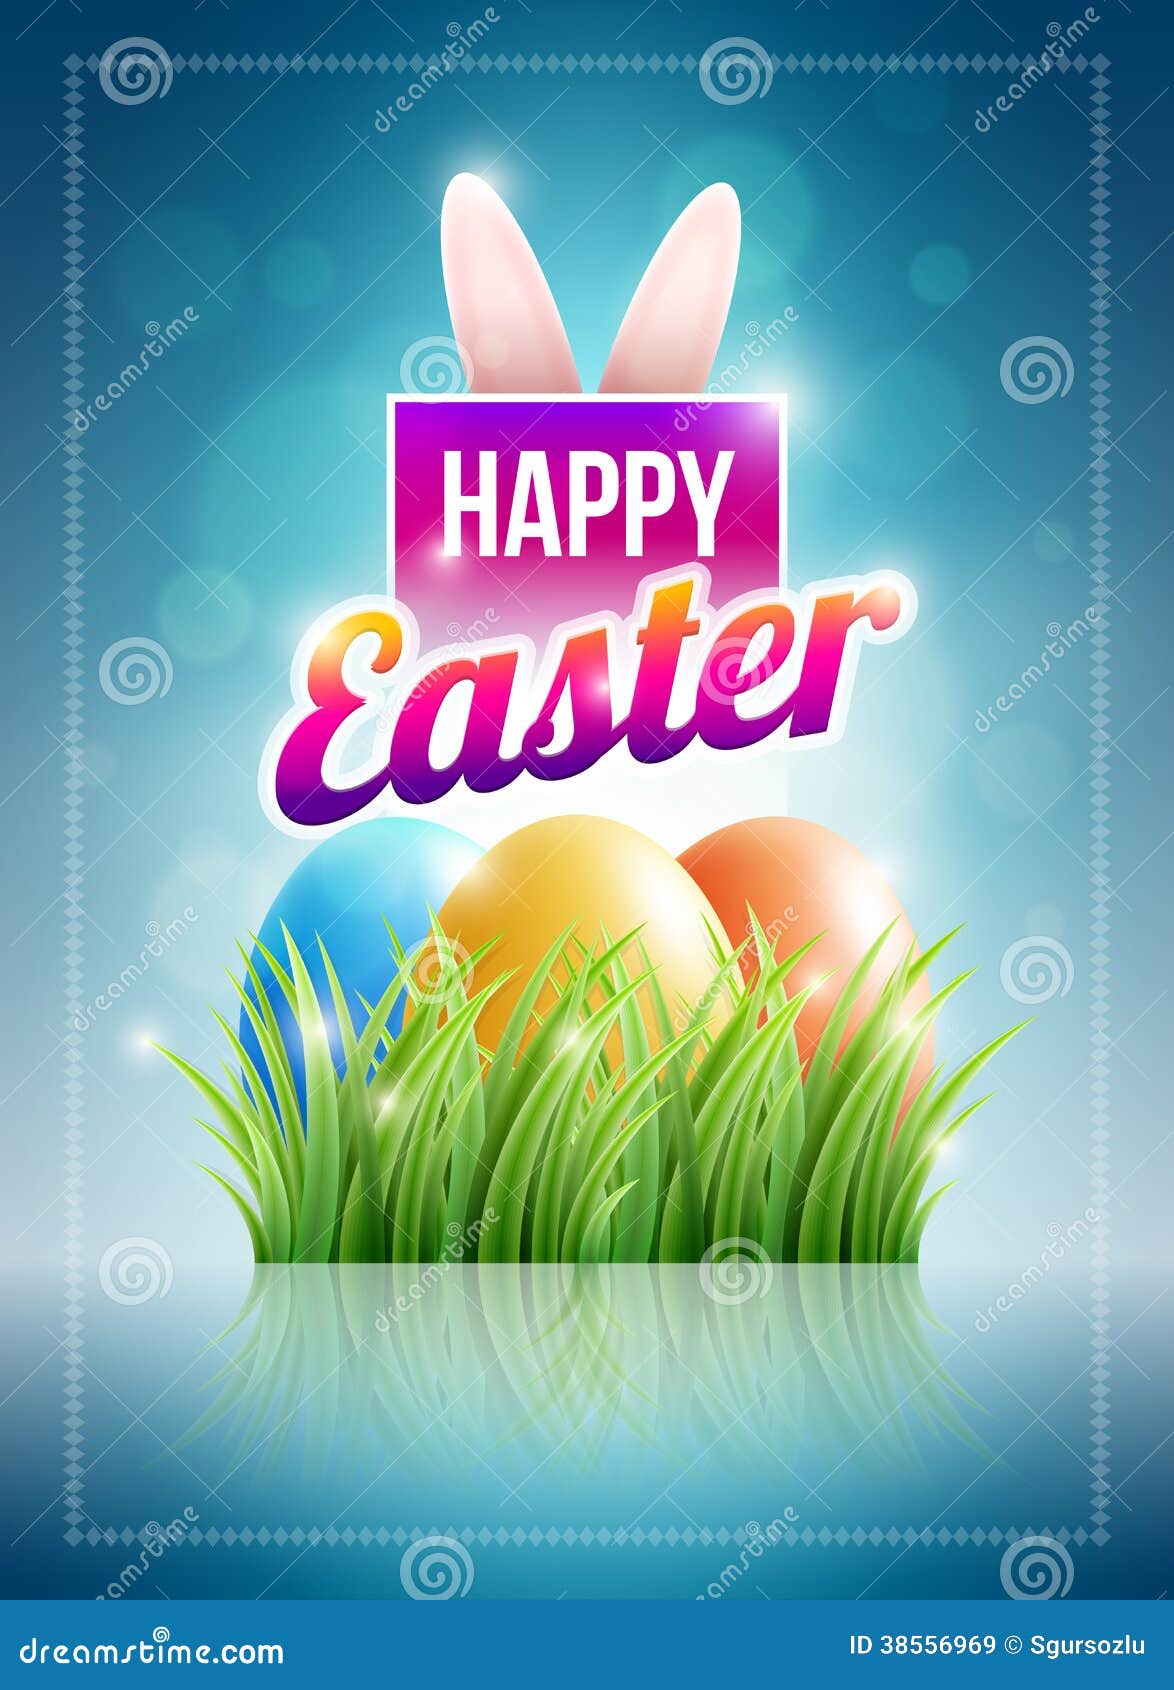 clipart easter poster - photo #40